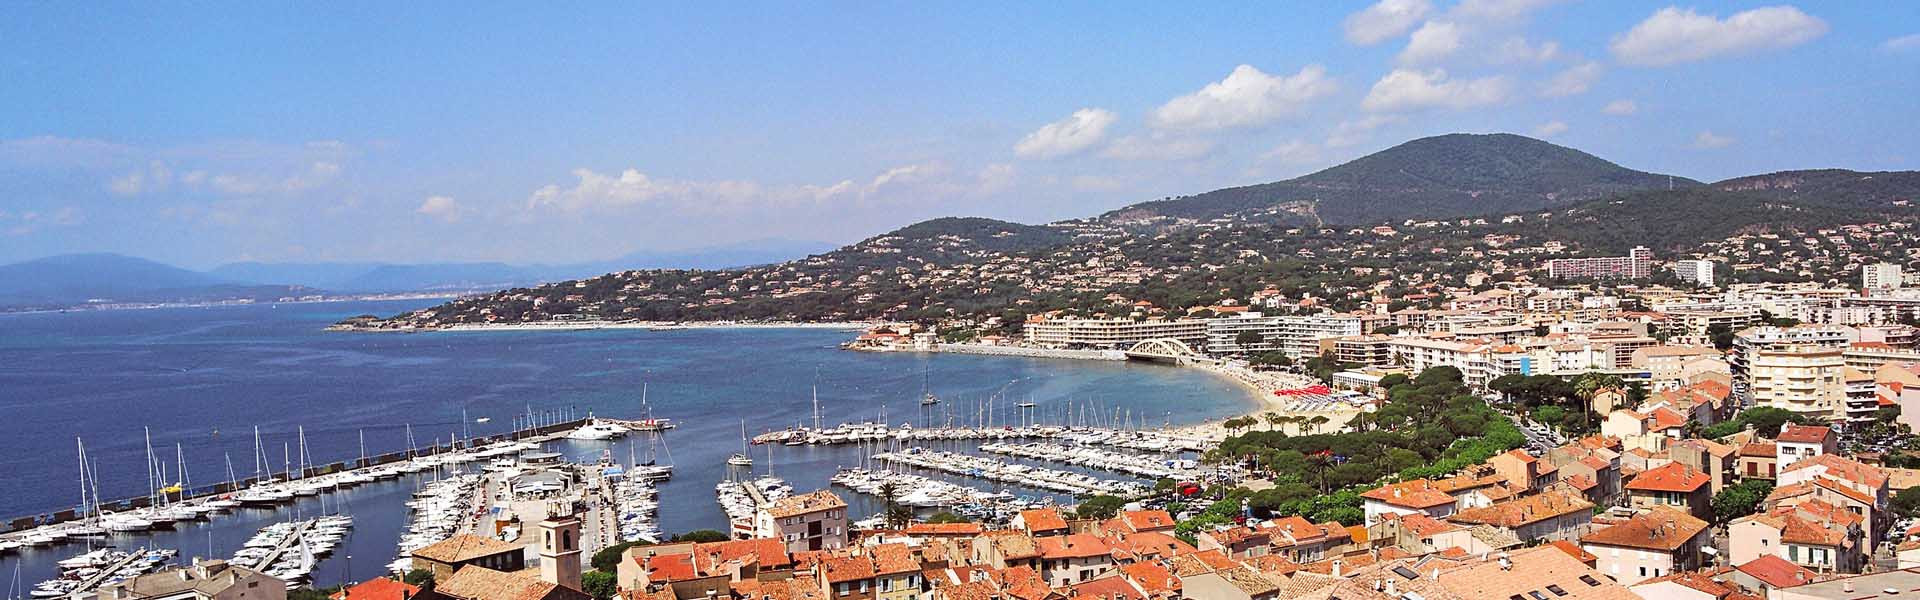 The Showdown European Top Twelve 2021 will be held in the French city of Sainte-Maxime ©Sainte-Maxime